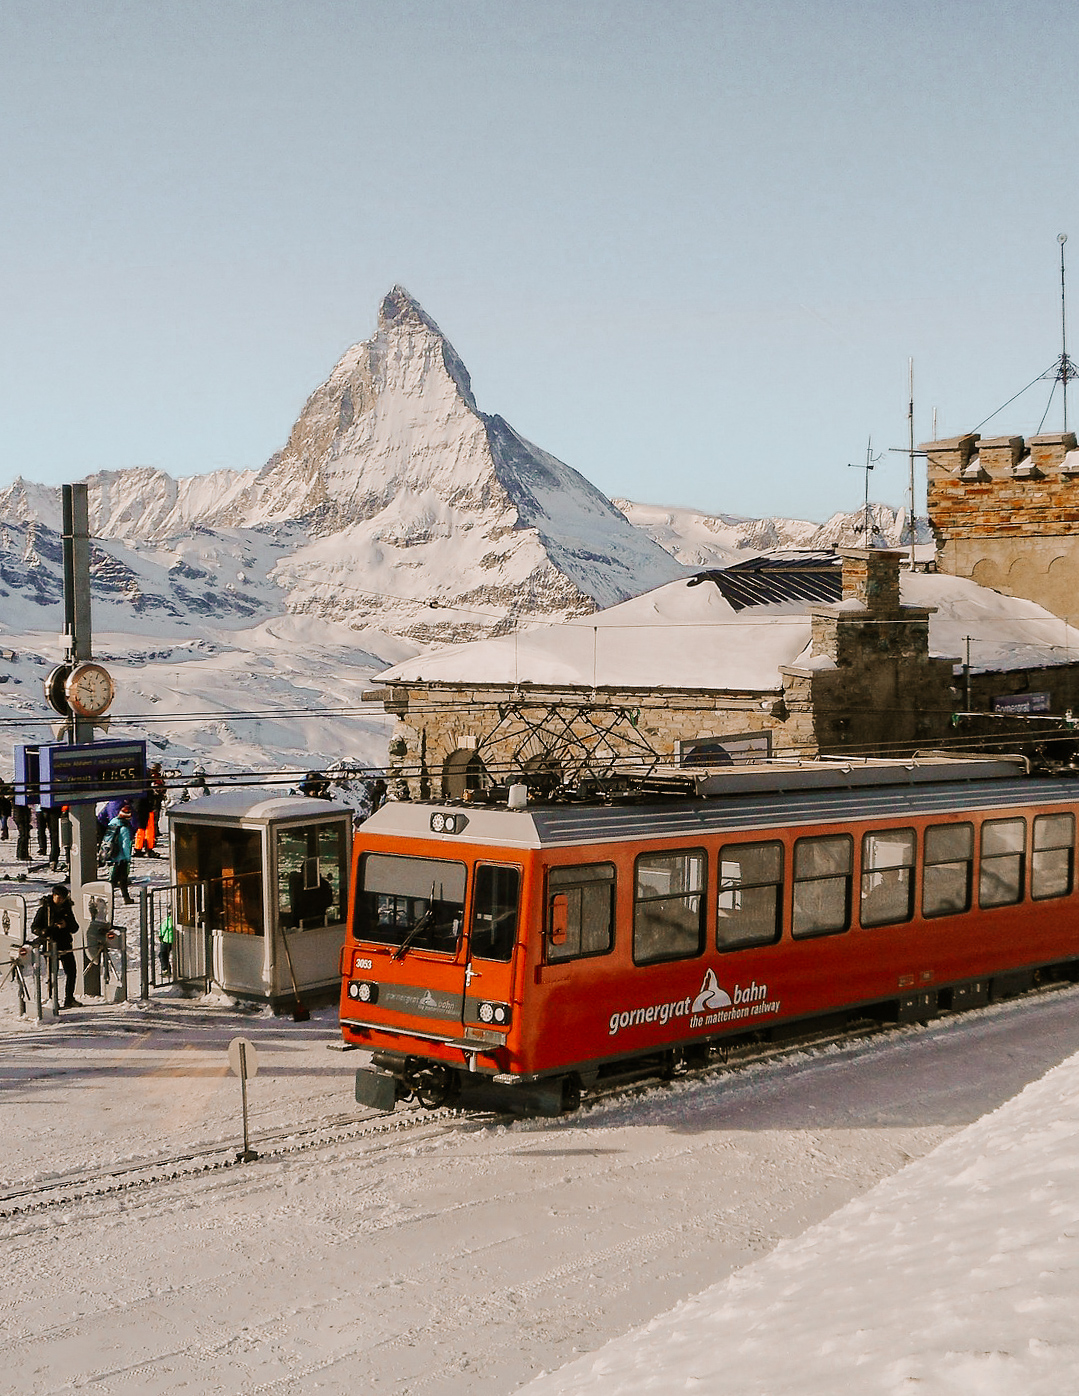 A red cogwheel railway train in front of the Matterhorn in winter, with several people standing nearby on the train platform.